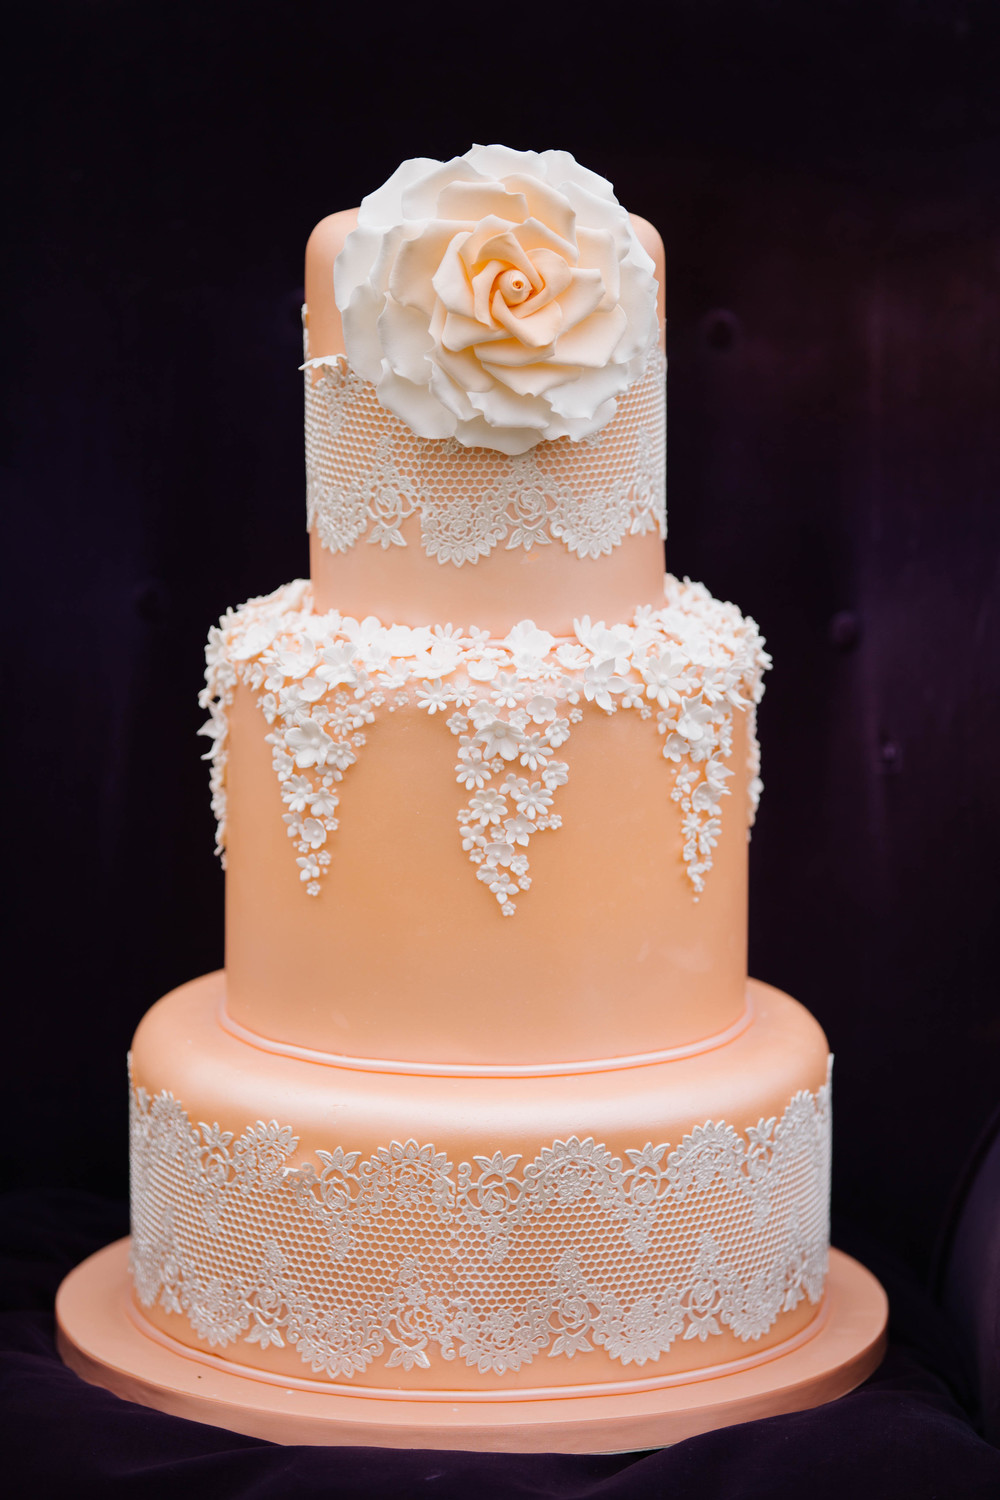 Wedding lace cake in coral